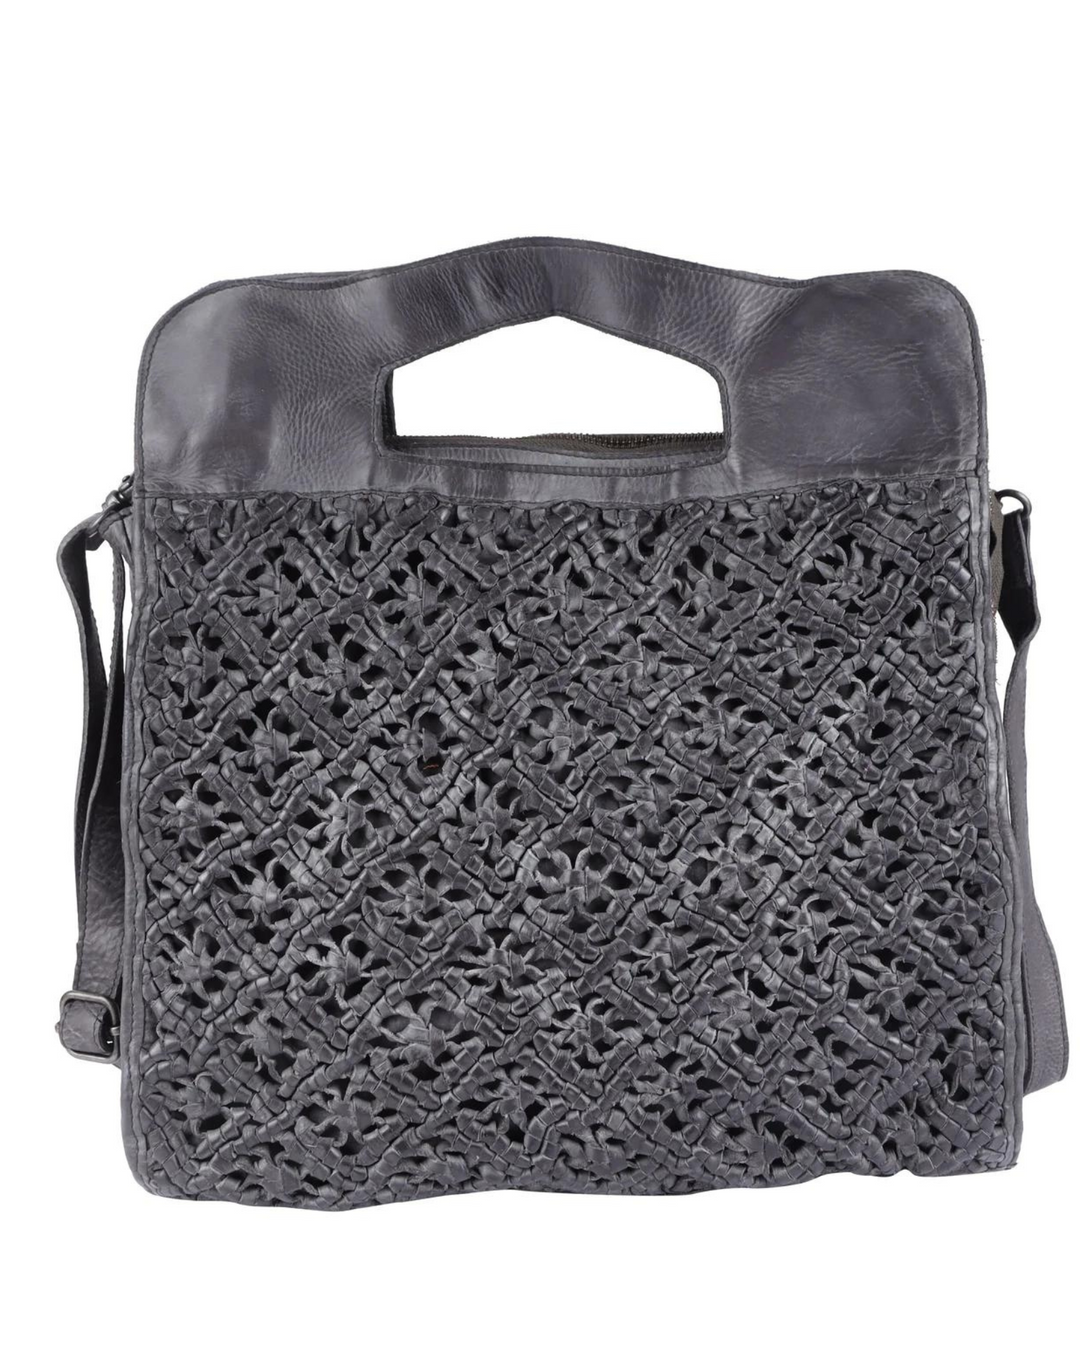 Latico Beth Tote in Charcoal - Dear Lucy